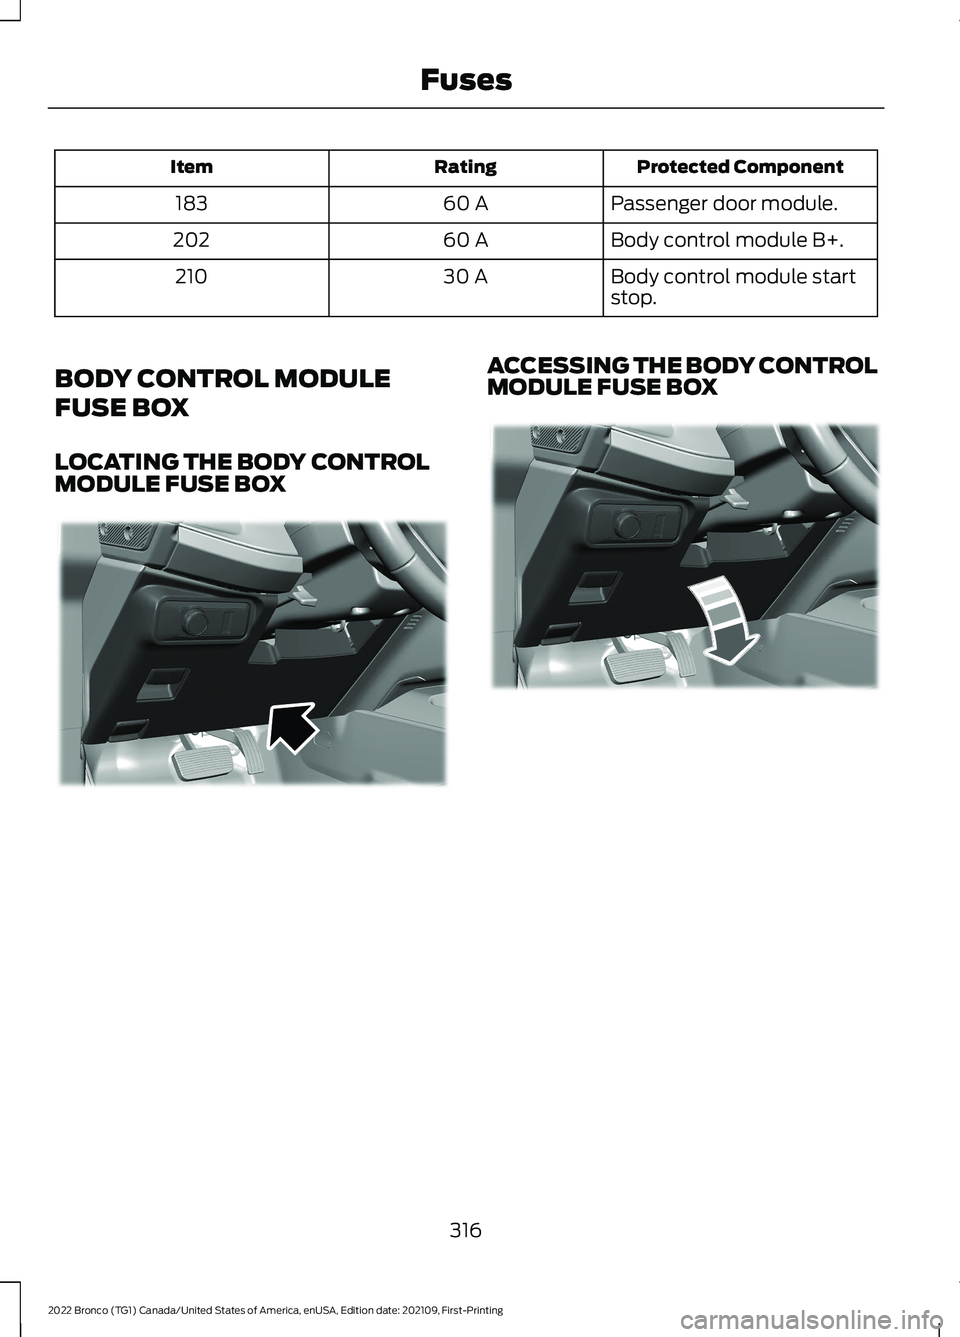 FORD BRONCO 2022  Owners Manual Protected ComponentRatingItem
Passenger door module.60 A183
Body control module B+.60 A202
Body control module startstop.30 A210
BODY CONTROL MODULE
FUSE BOX
LOCATING THE BODY CONTROLMODULE FUSE BOX
A